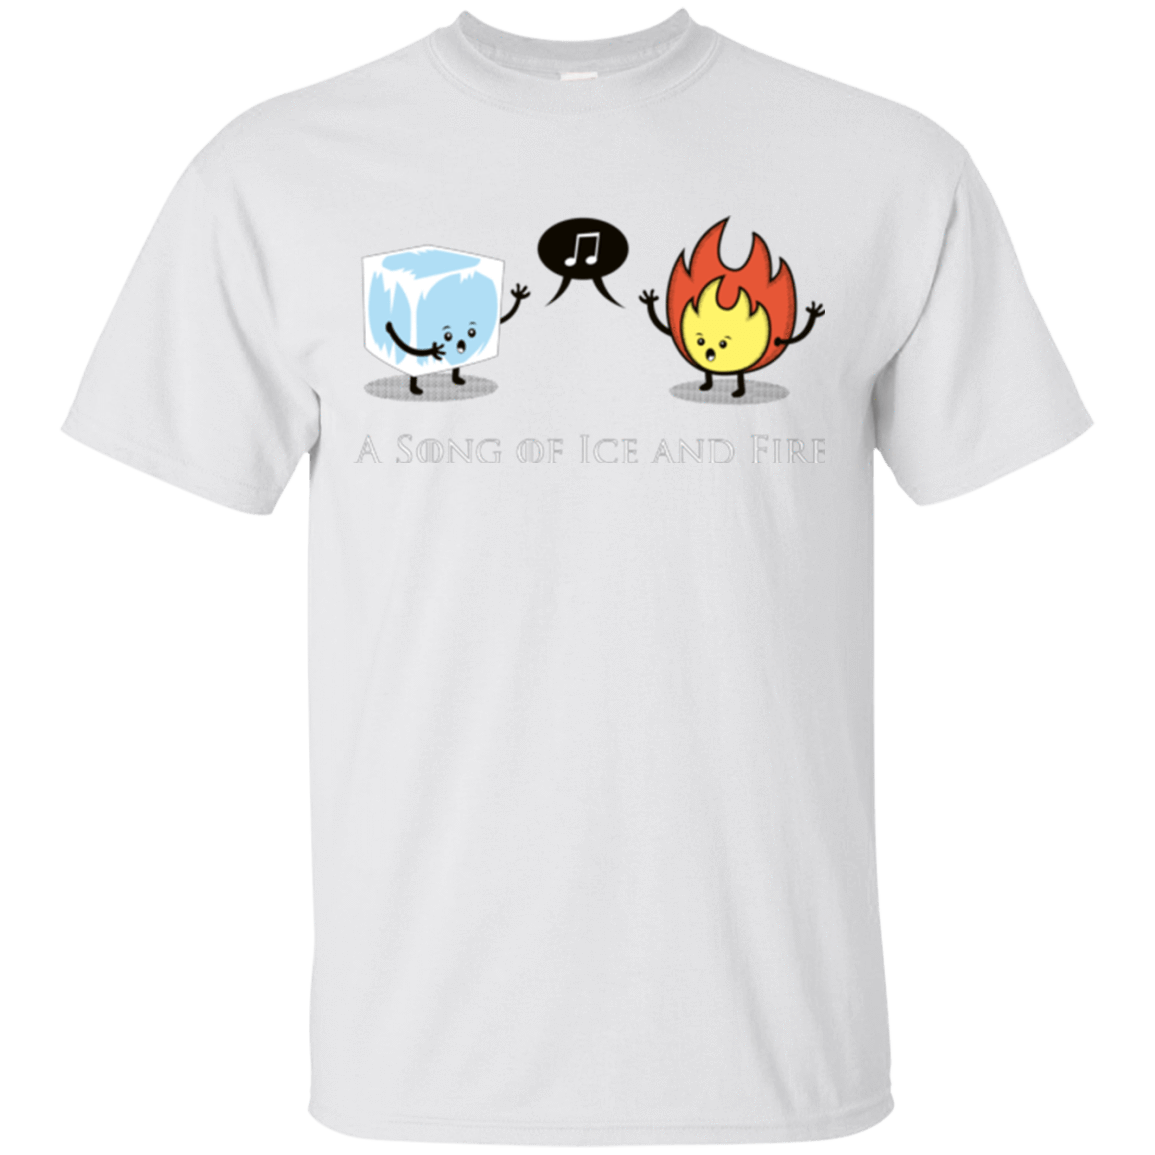 T-Shirts White / Small A Song of Ice and Fire T-Shirt